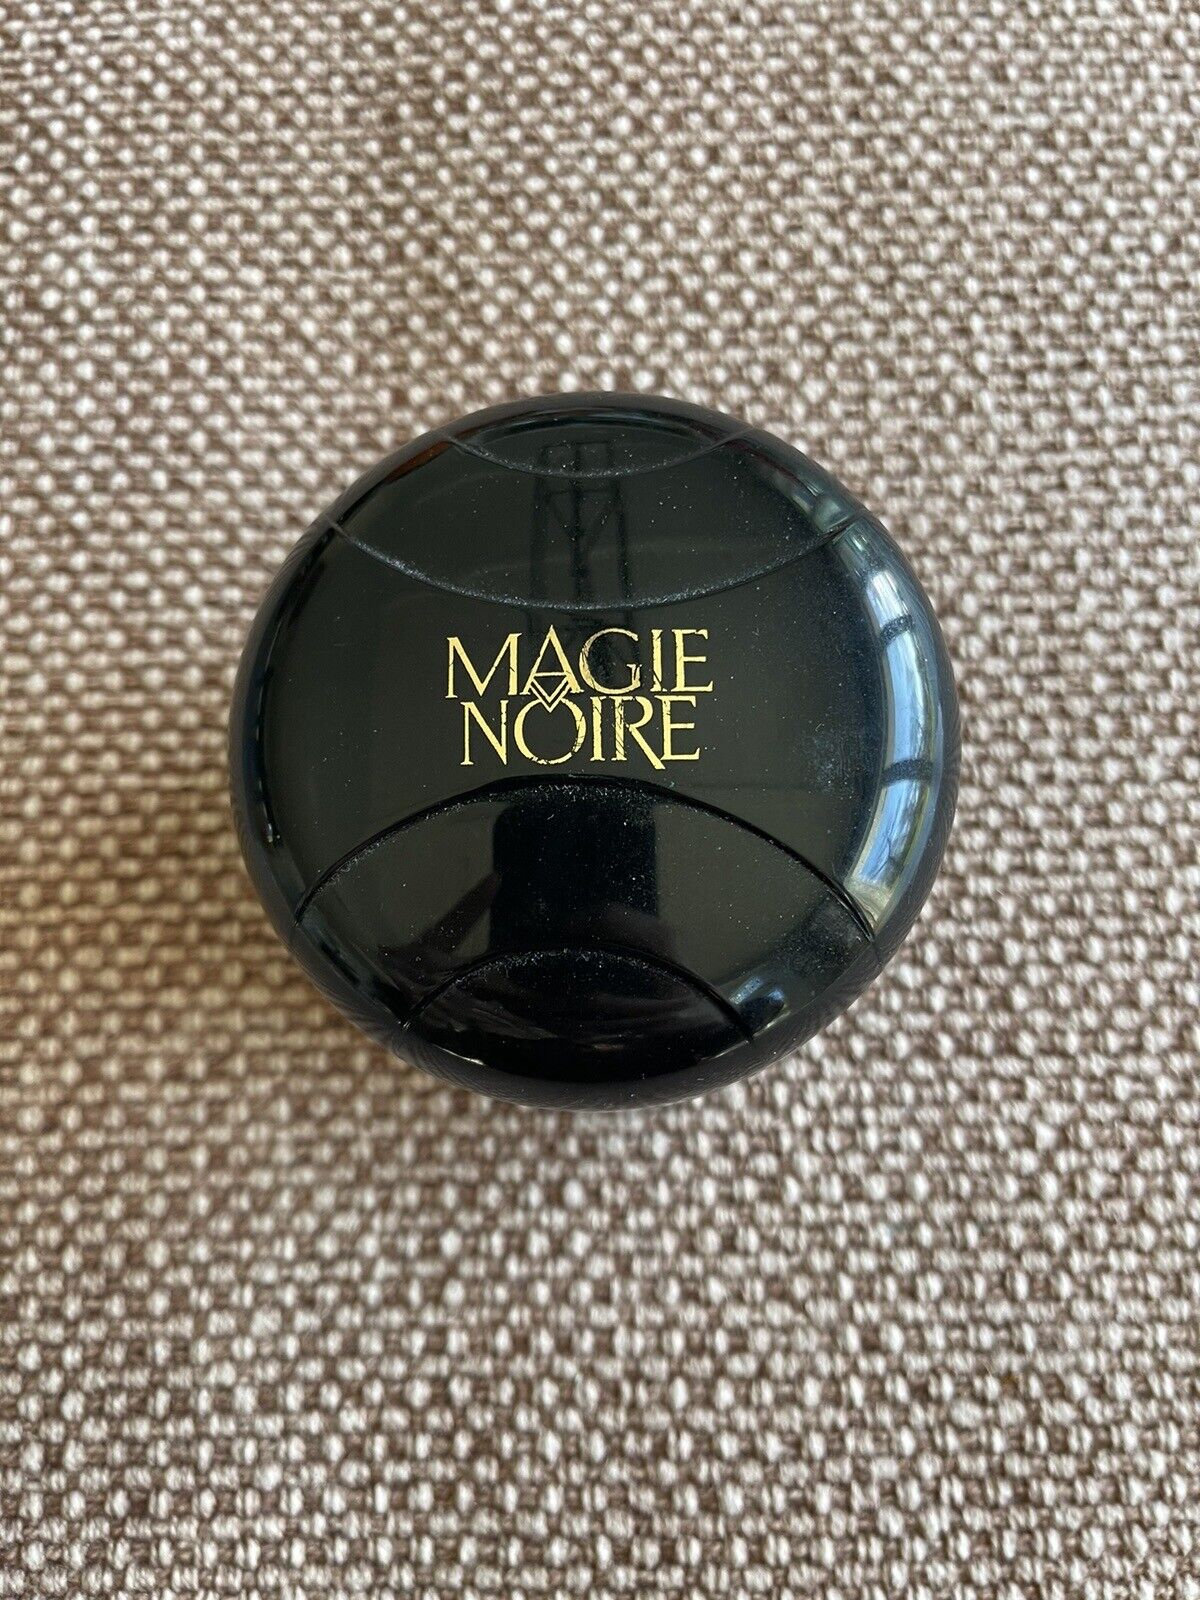 VTG Lancome Magie Noire Woman\'s Body Creme 200ML 50% FULL AS PICTURED